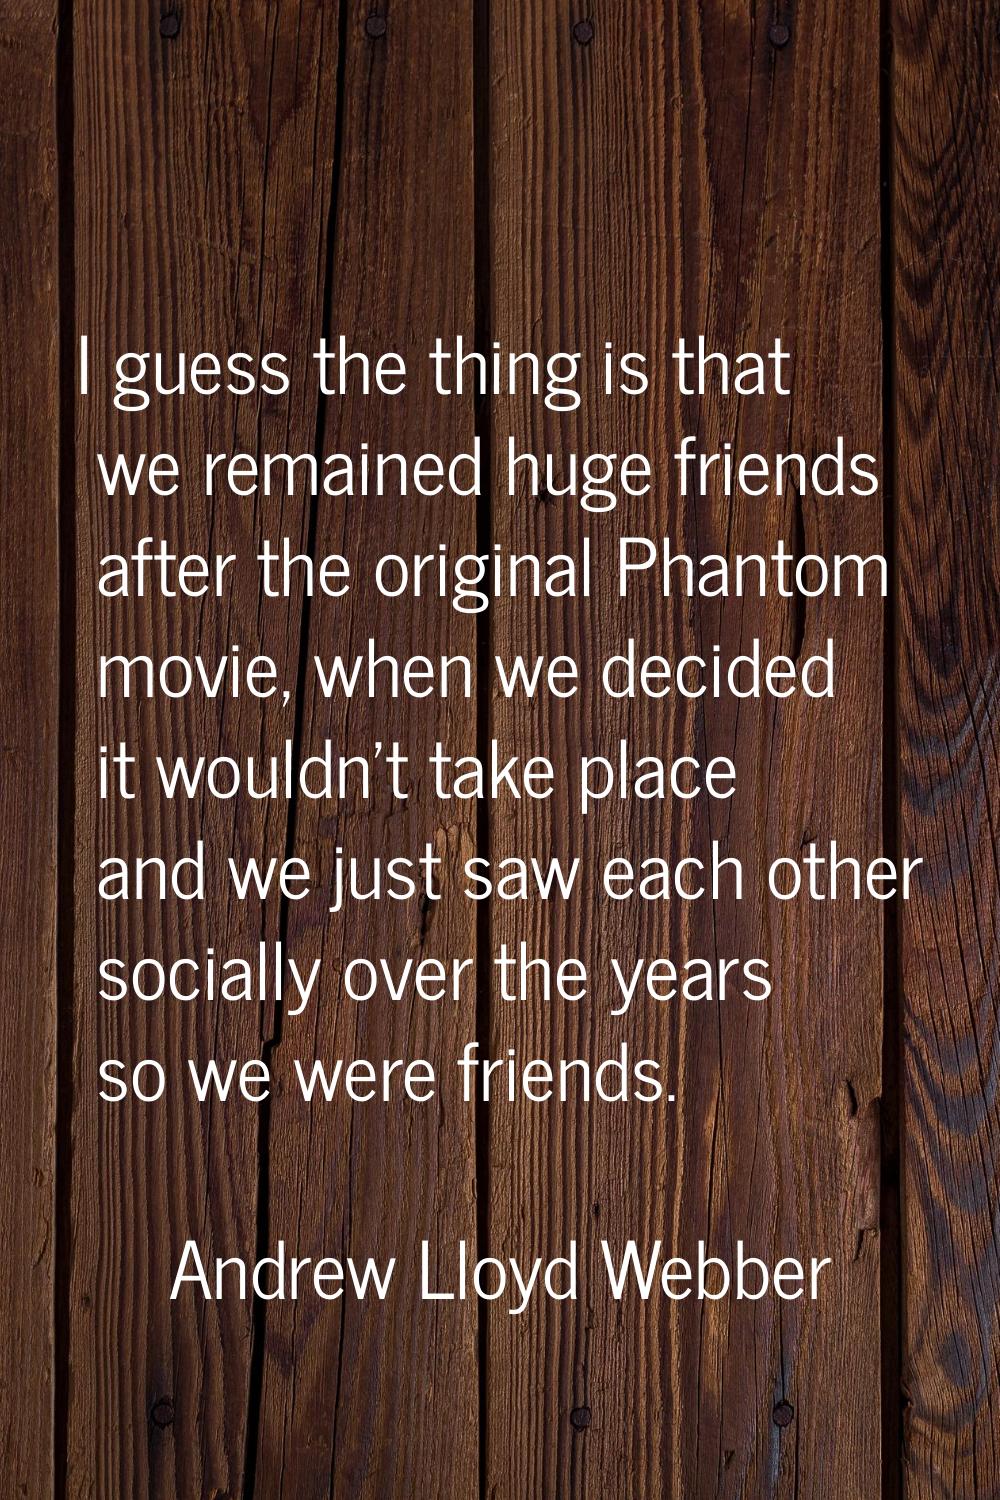 I guess the thing is that we remained huge friends after the original Phantom movie, when we decide